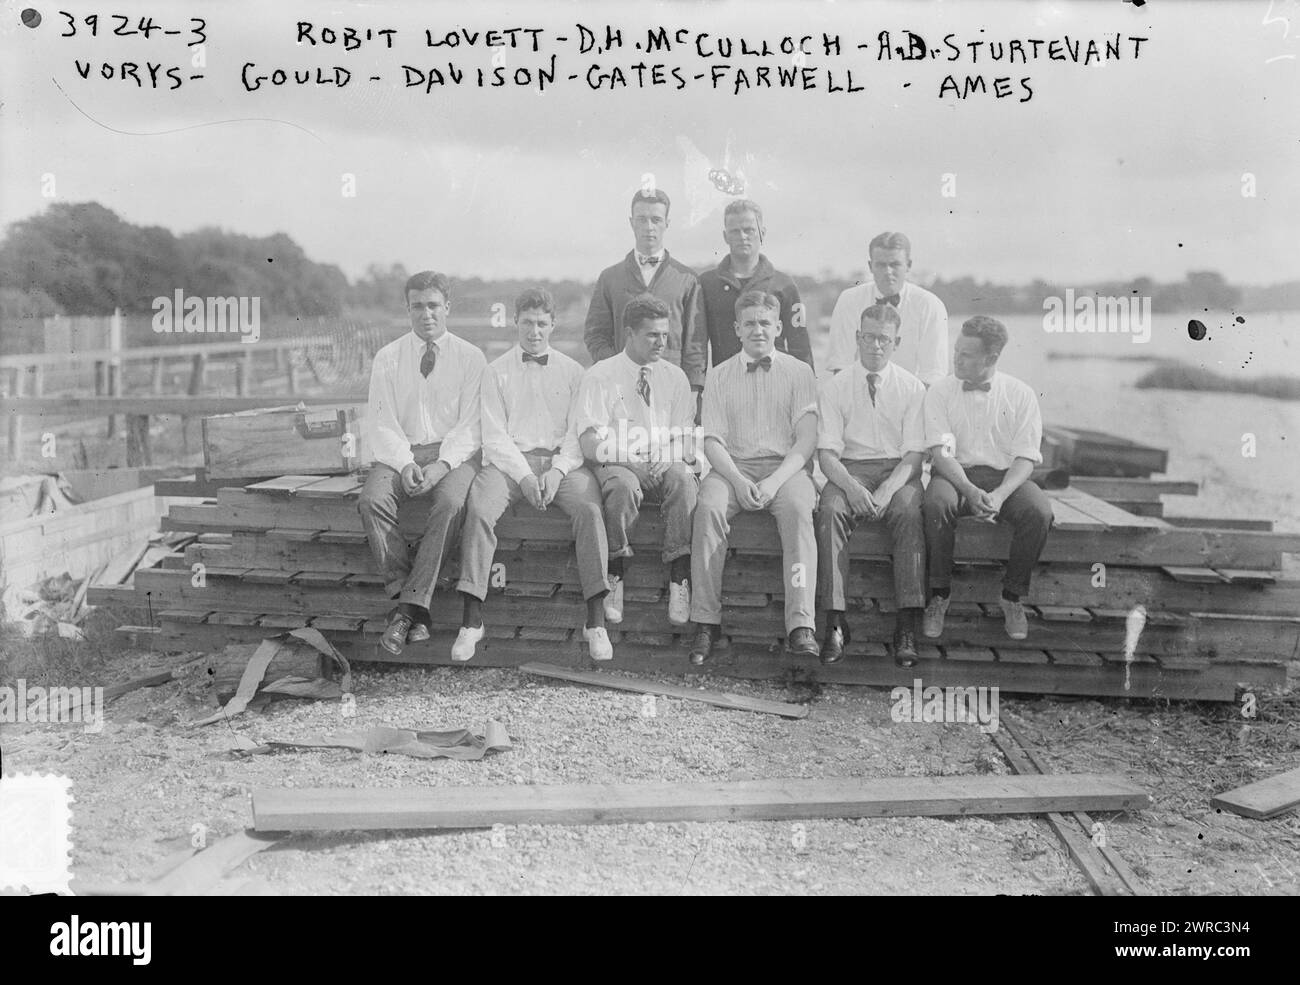 Rob't Lovett, D.H. McCulloch, A.D. Sturtevant, Vorys, Gould, Davison, Gates, Farwell, Ames, Photograph shows men who came to train at the aviation school at Port Washington, Long Island, New York, in order to become a unit of the Aerial Coast Patrol. Pictured are: Robert Lovett, David H. McCulloch (sometimes mispelled McCullough), Albert Dillon Sturtevant (1894-1918) who served as an officer in the United States Navy during World War I, John Martin Vorys, Erl Clinton Barker Gould, Prederick Trubee Davison, Artemus Lamb Gates, John V. Farwell III, and Allan Wallace Ames., 1916 Stock Photo